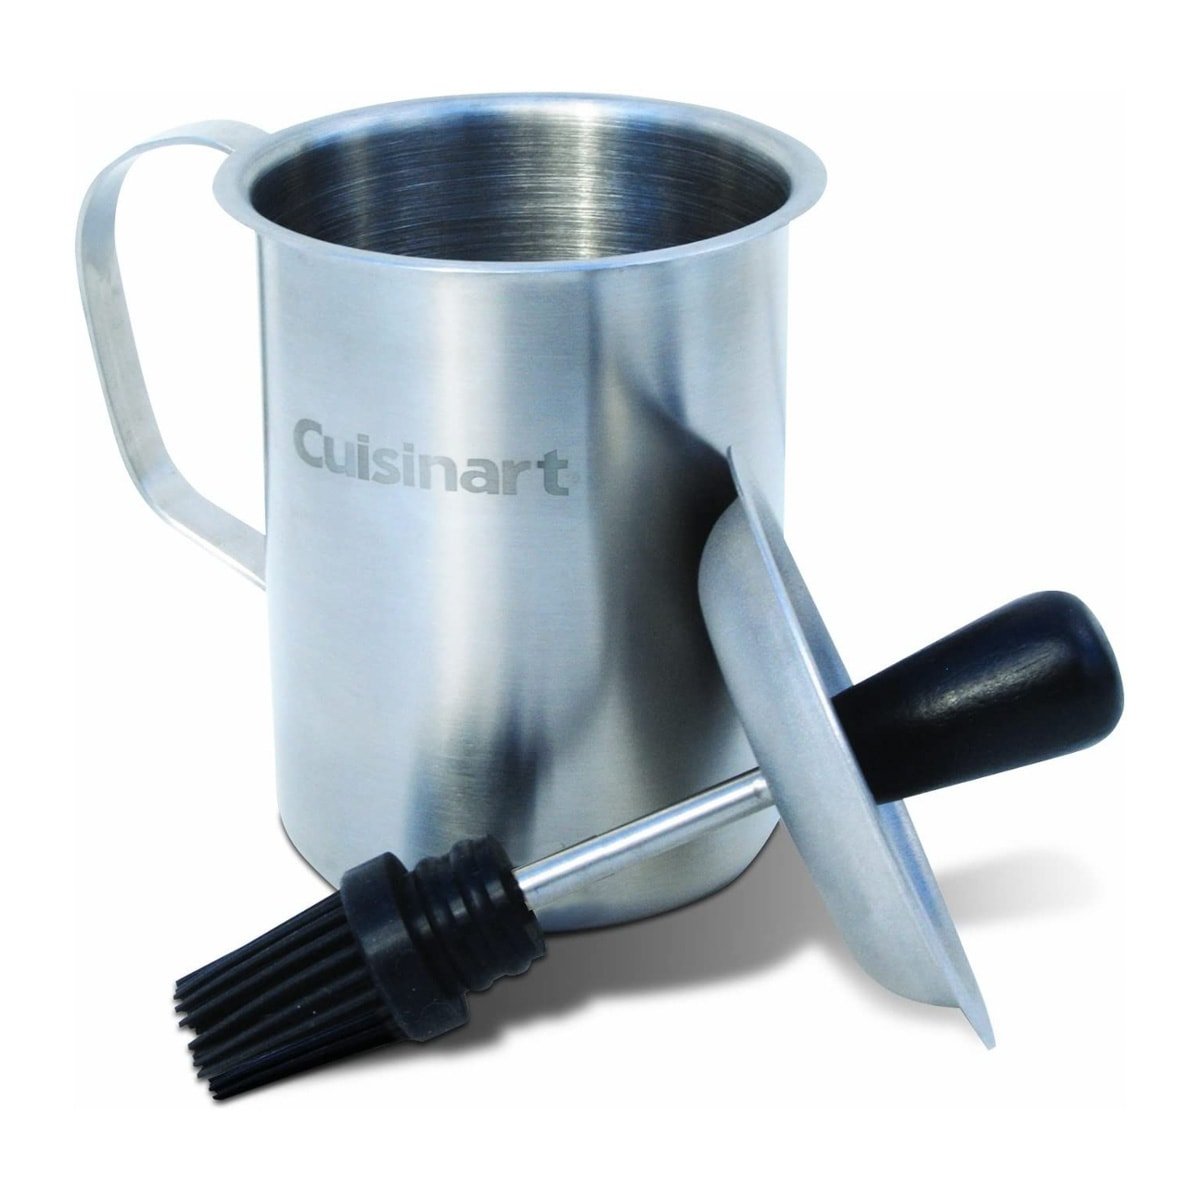 A stainless steel pot with a lid that has a black basting brush and handle attached to it.